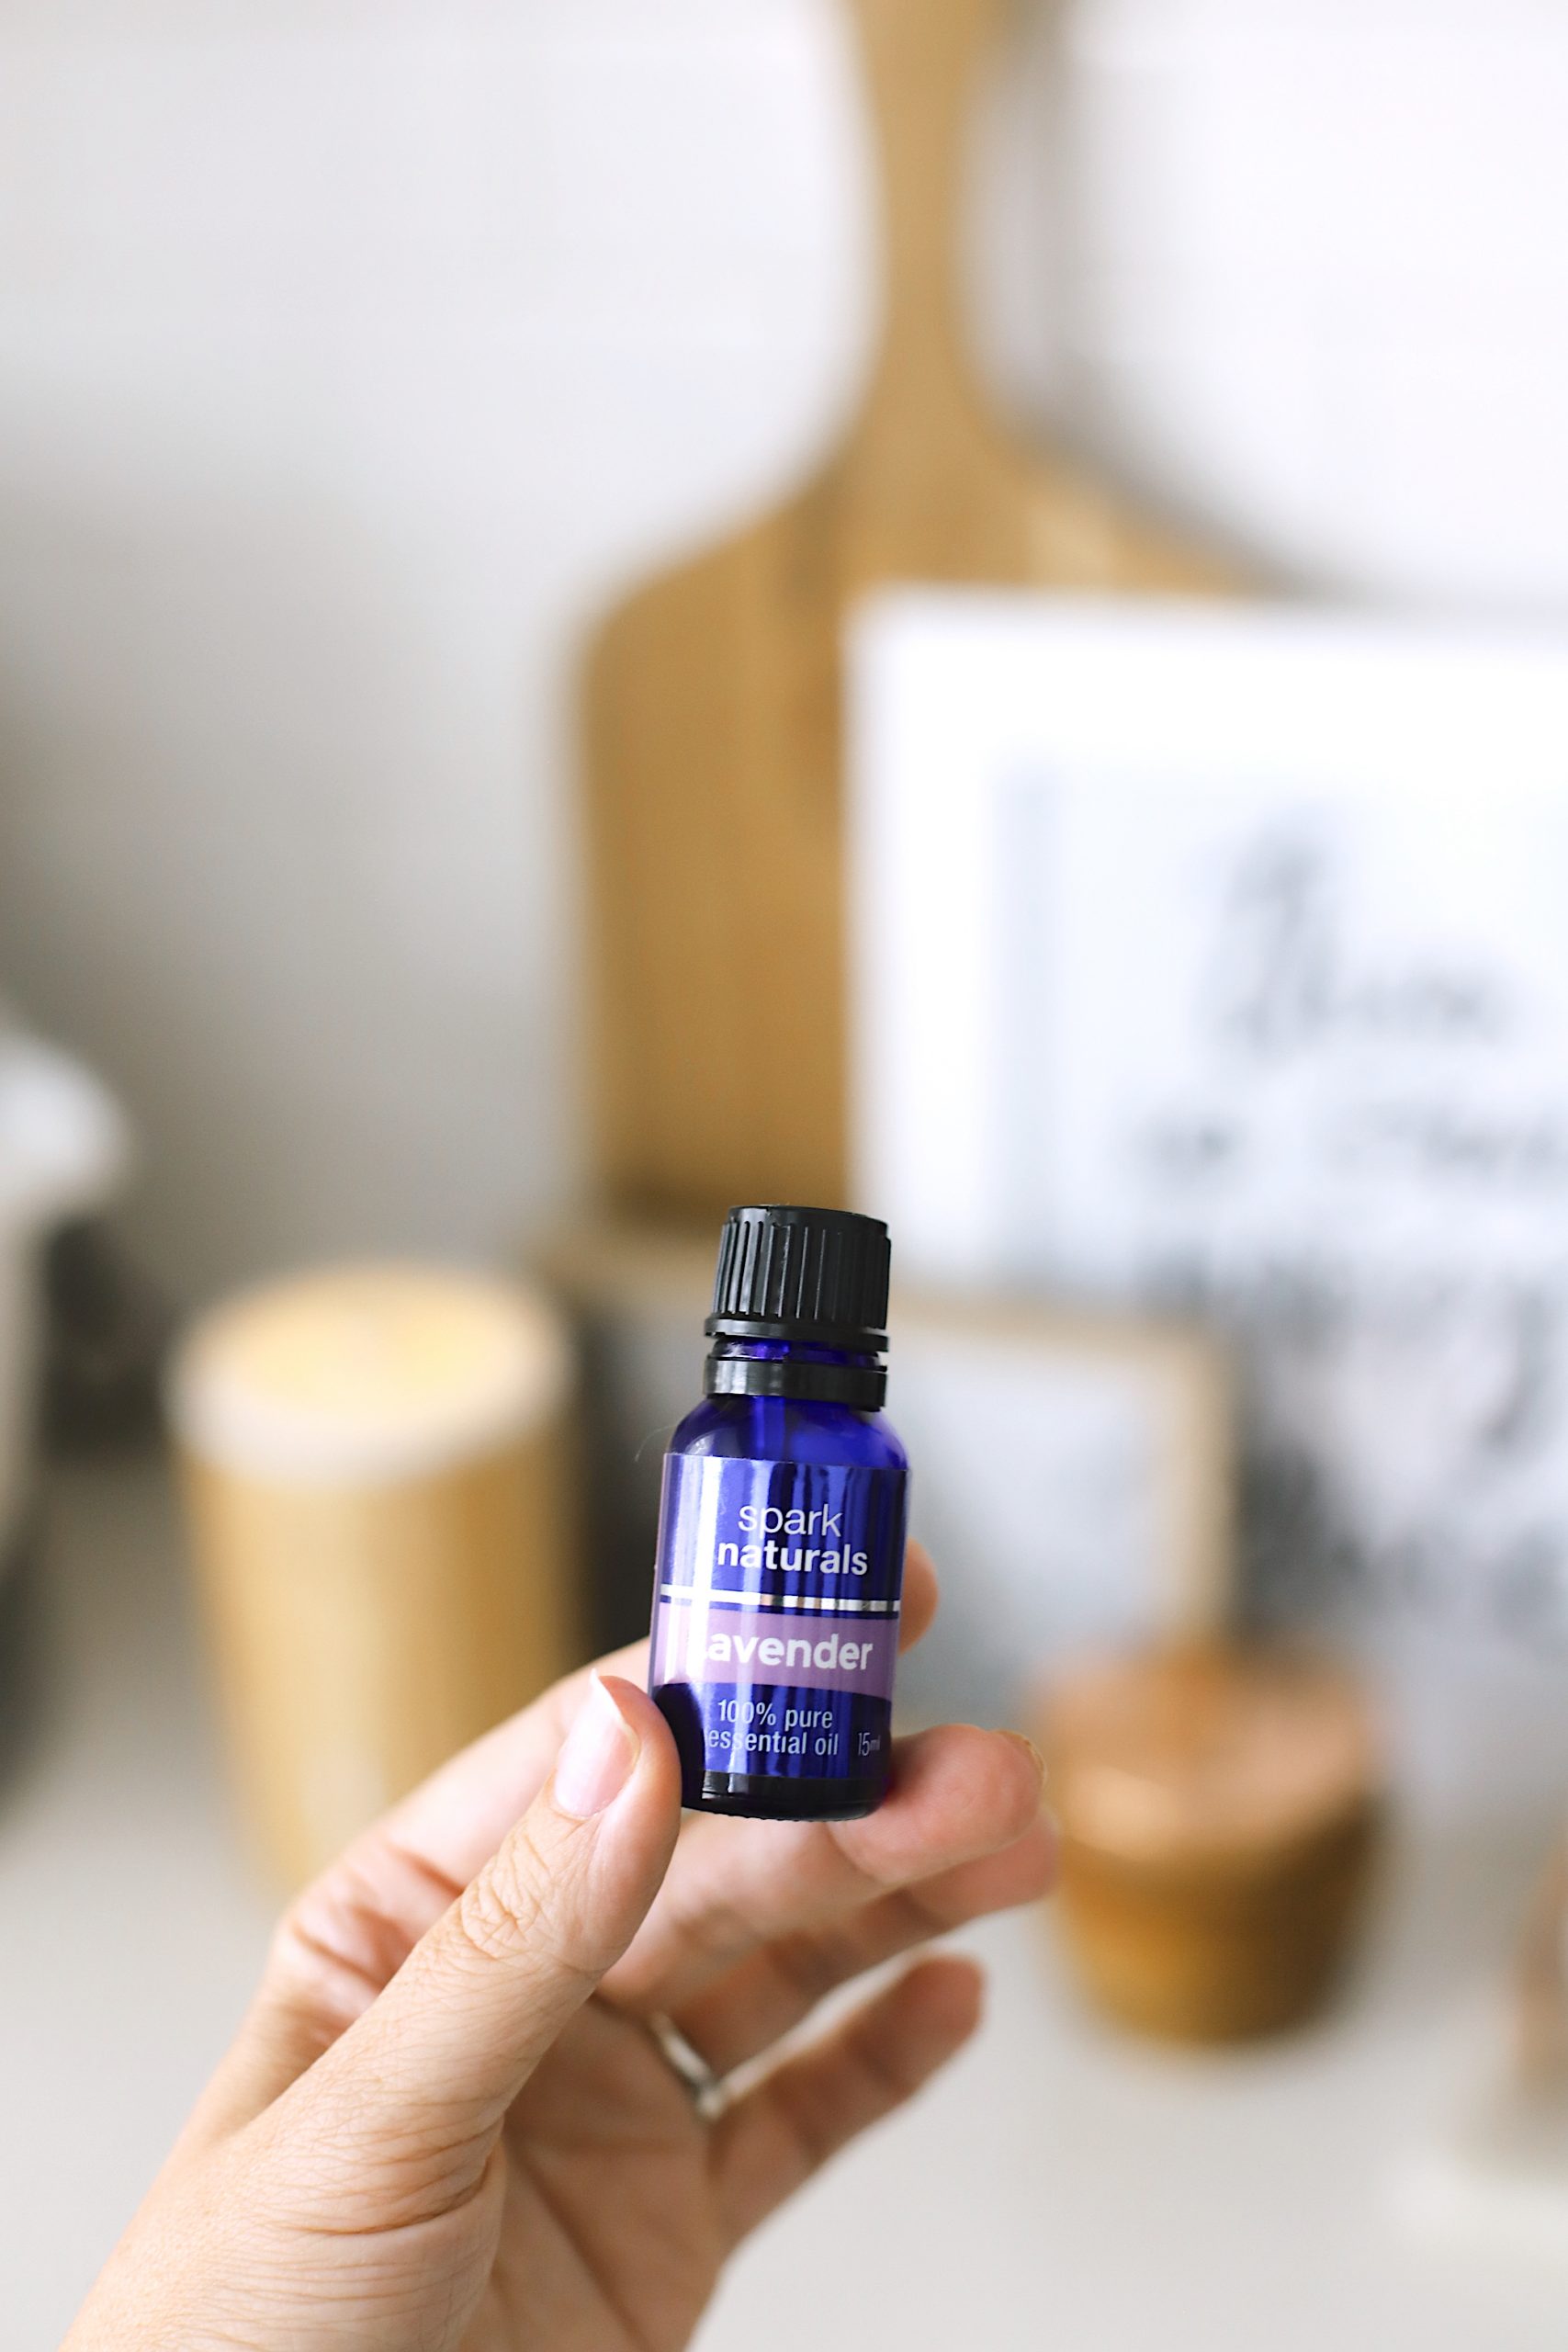 13 Spectacular Lavender Essential Oil Benefits You Need to Know About from Top US Lifestyle Blogger Tabitha Blue of Fresh Mommy Blog. | Lavender Essential Oil by popular Florida lifestyle blog, Fresh Mommy Blog: image of Spark Naturals lavender essential oil. 